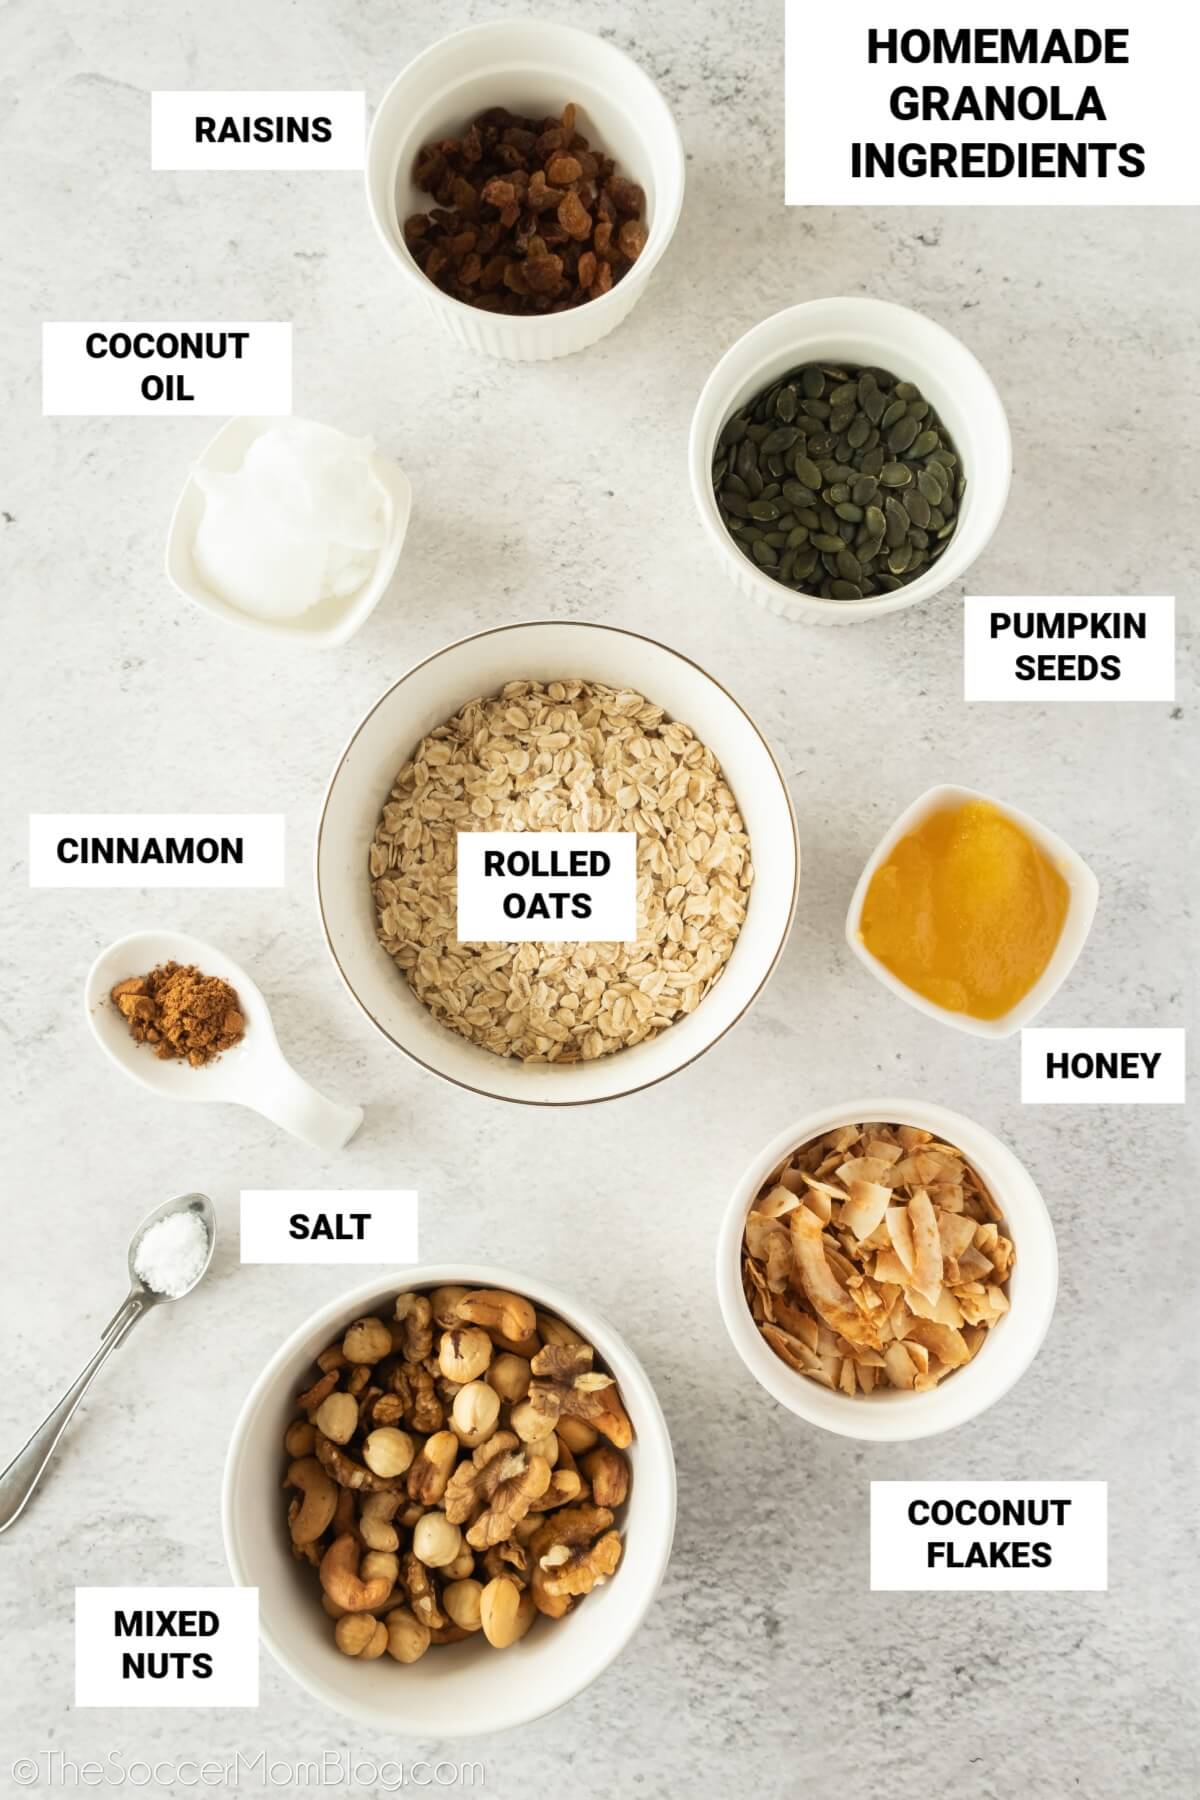 ingredients to make homemade granola, with text labels